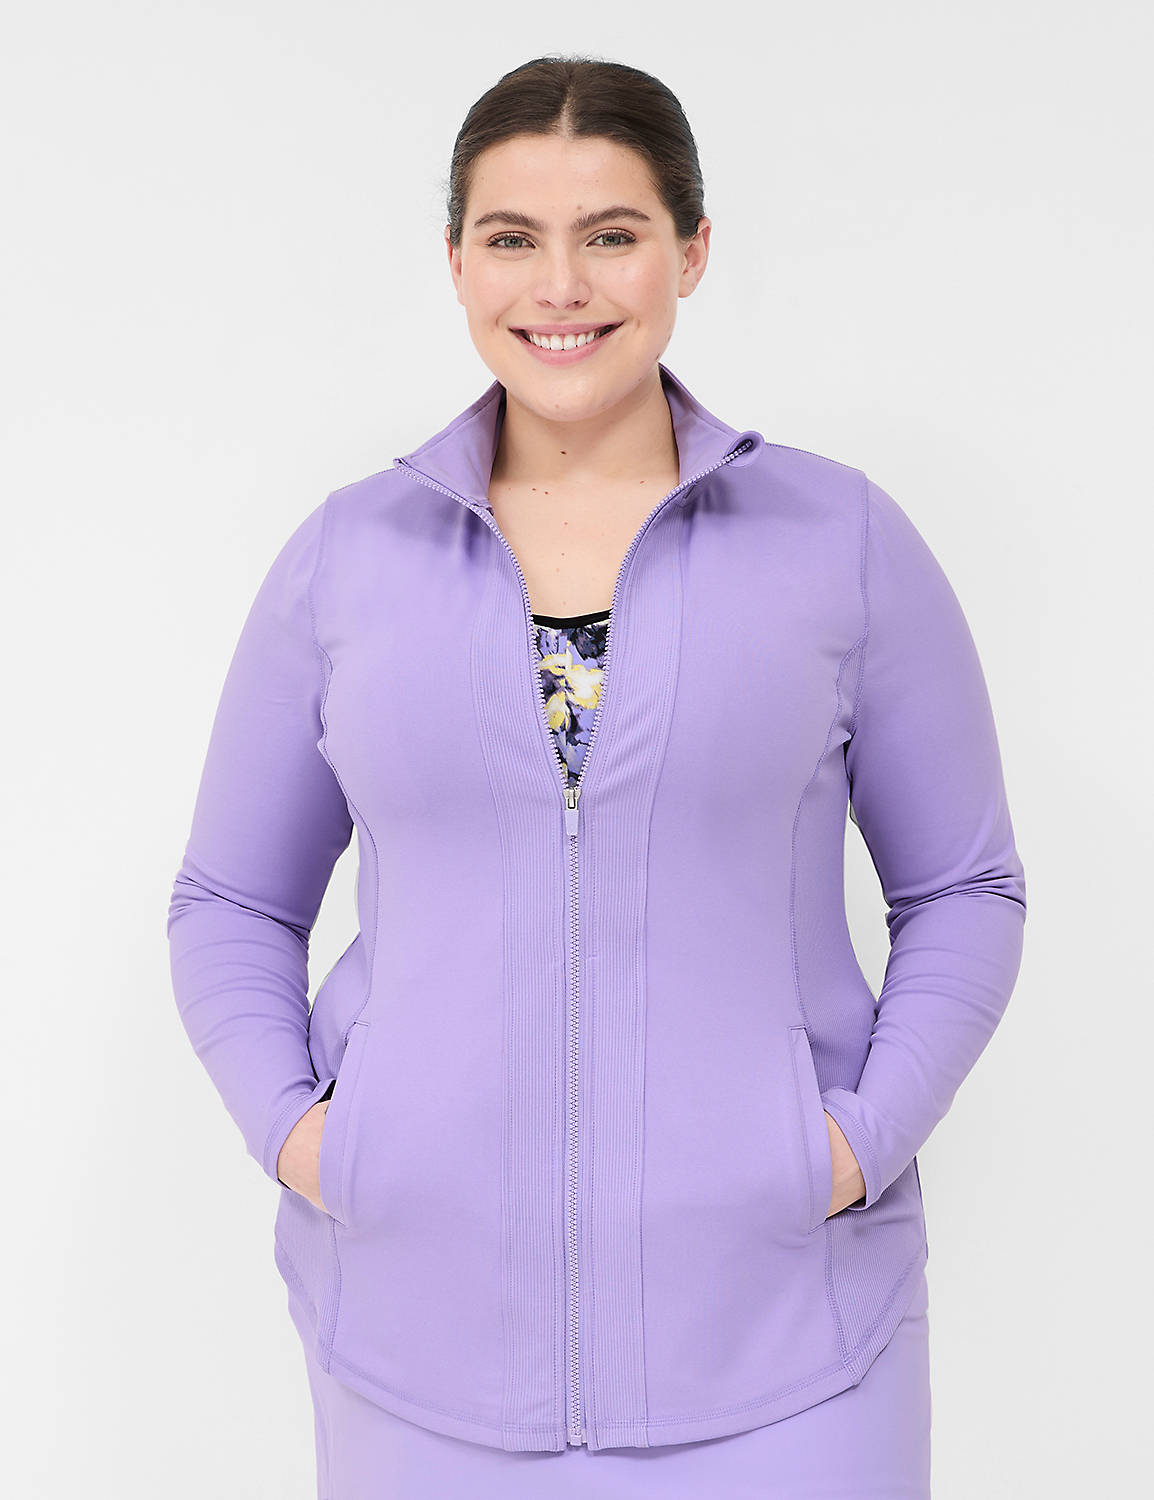 Long Sleeve Zip Front Wicking w/ Ri Product Image 1